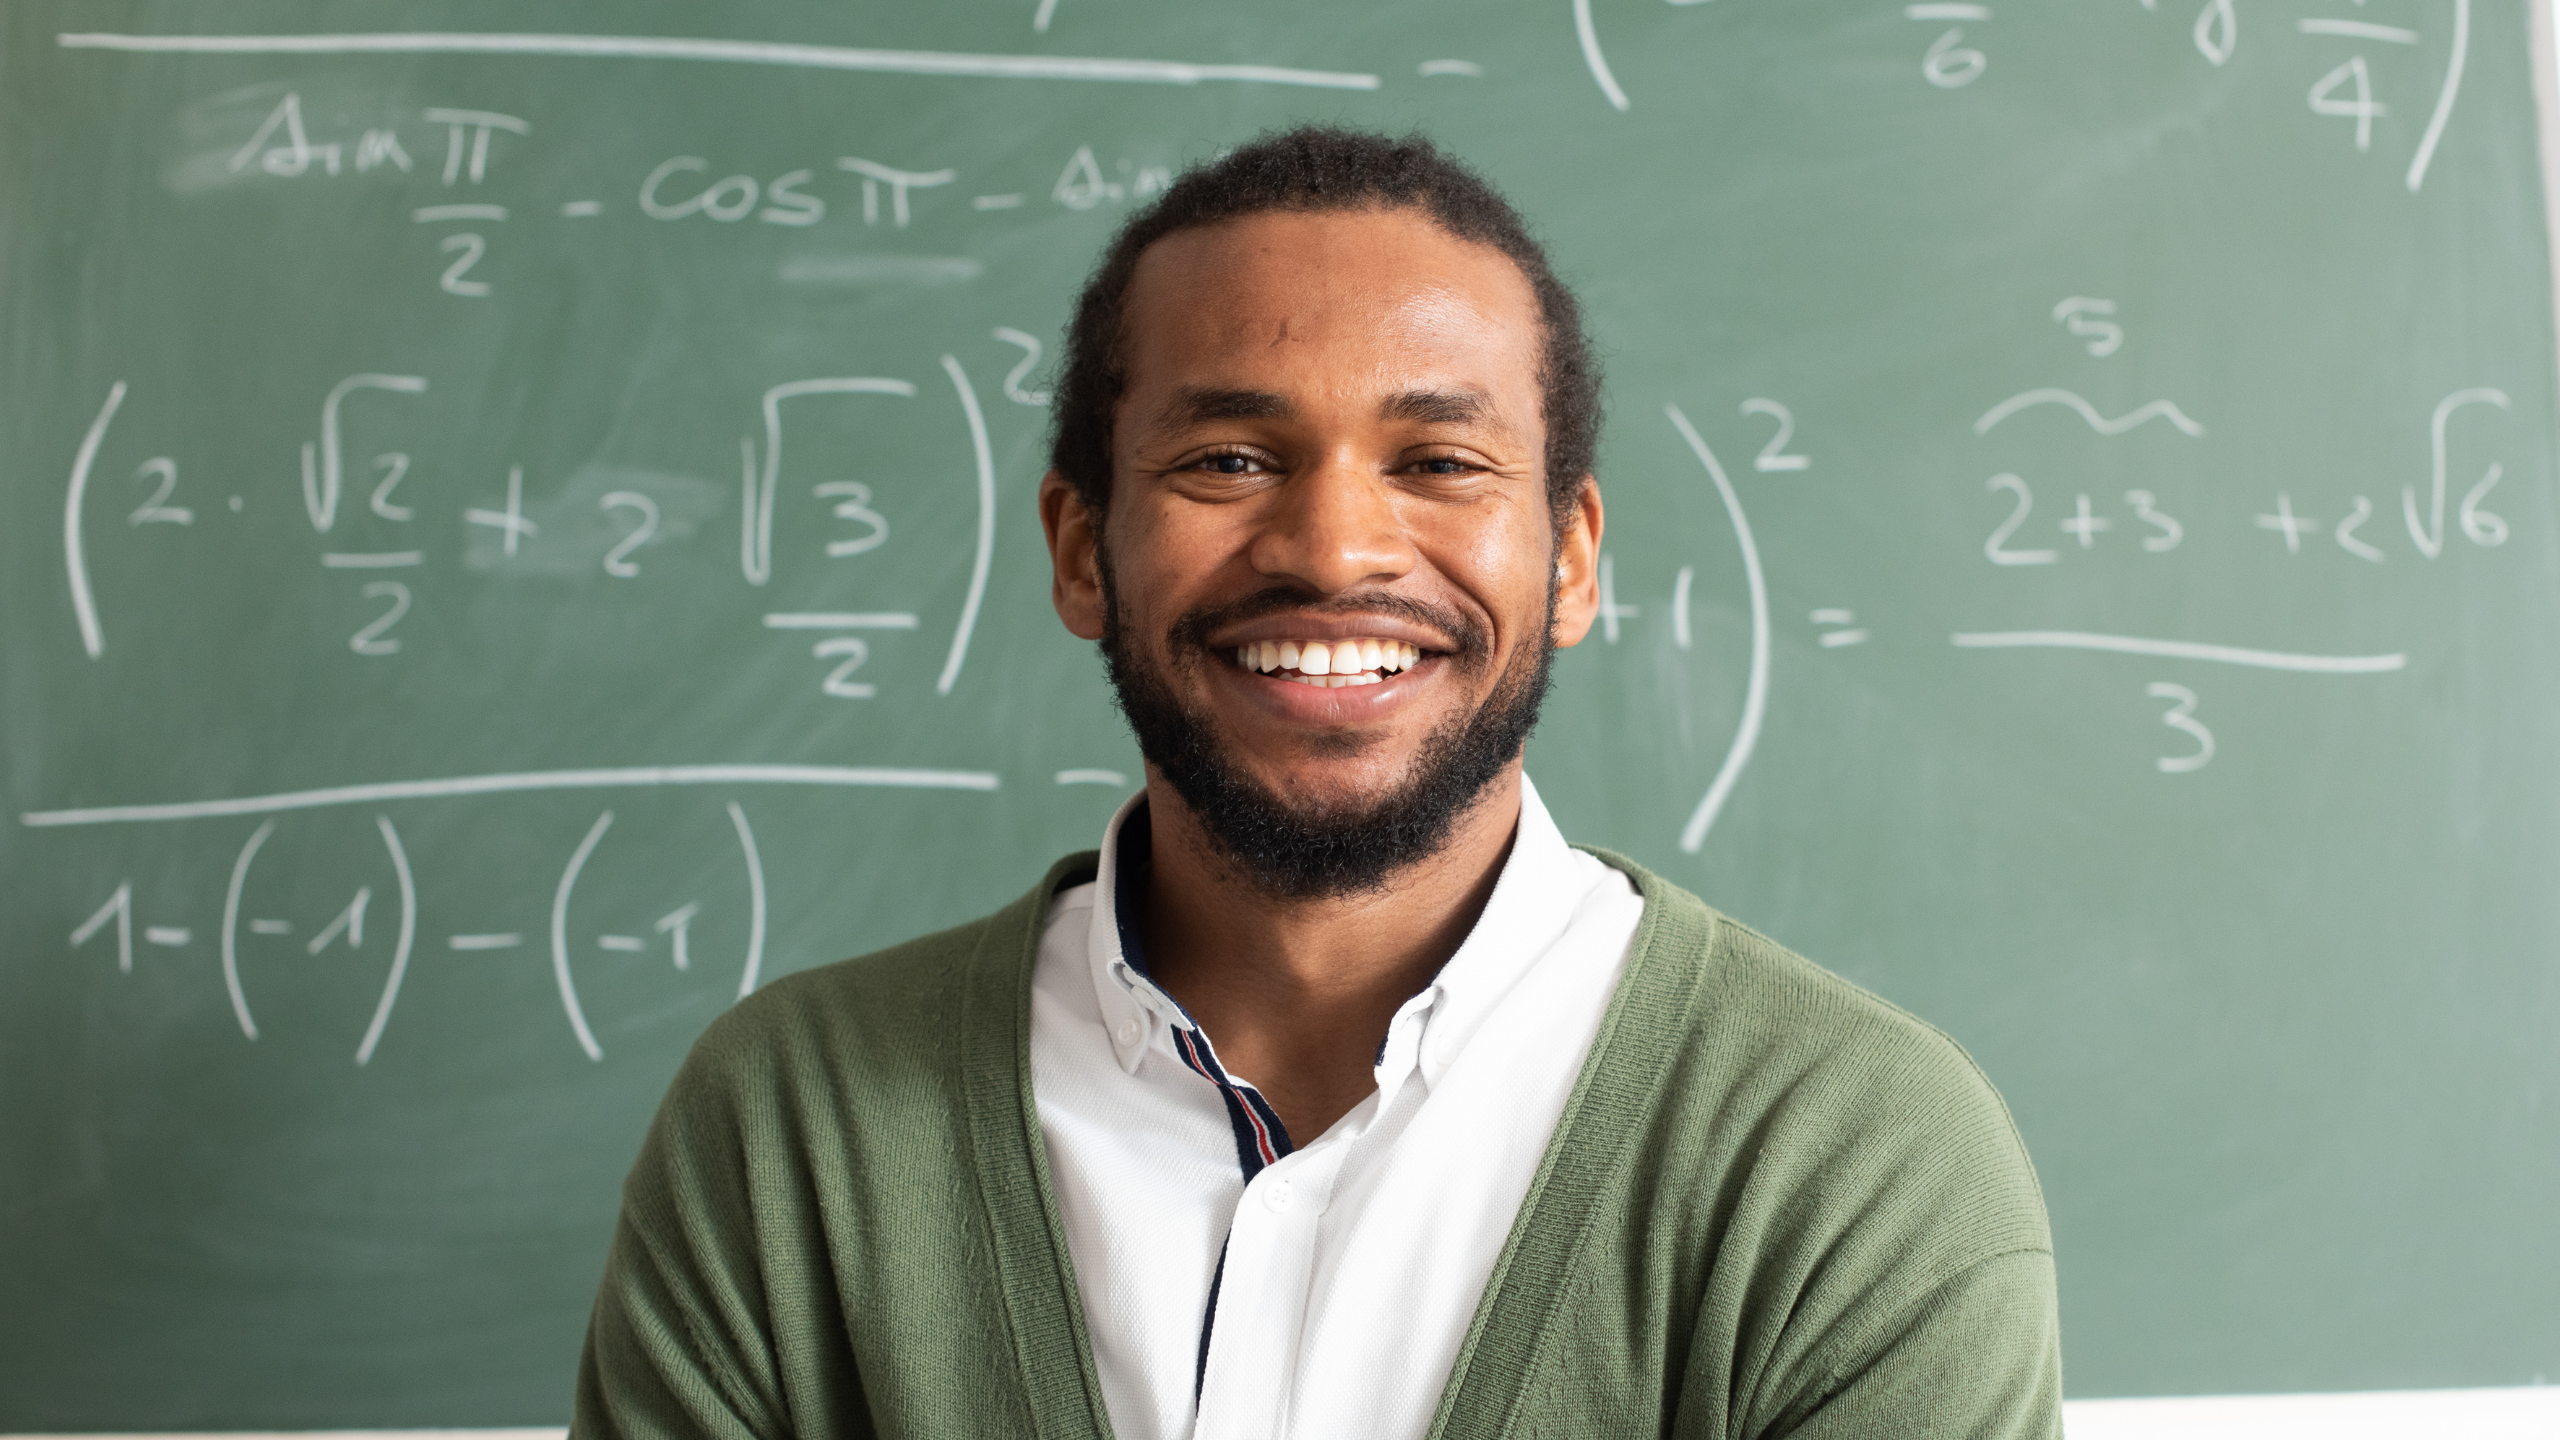 Black male teacher standing in front of a chalkboard smiling